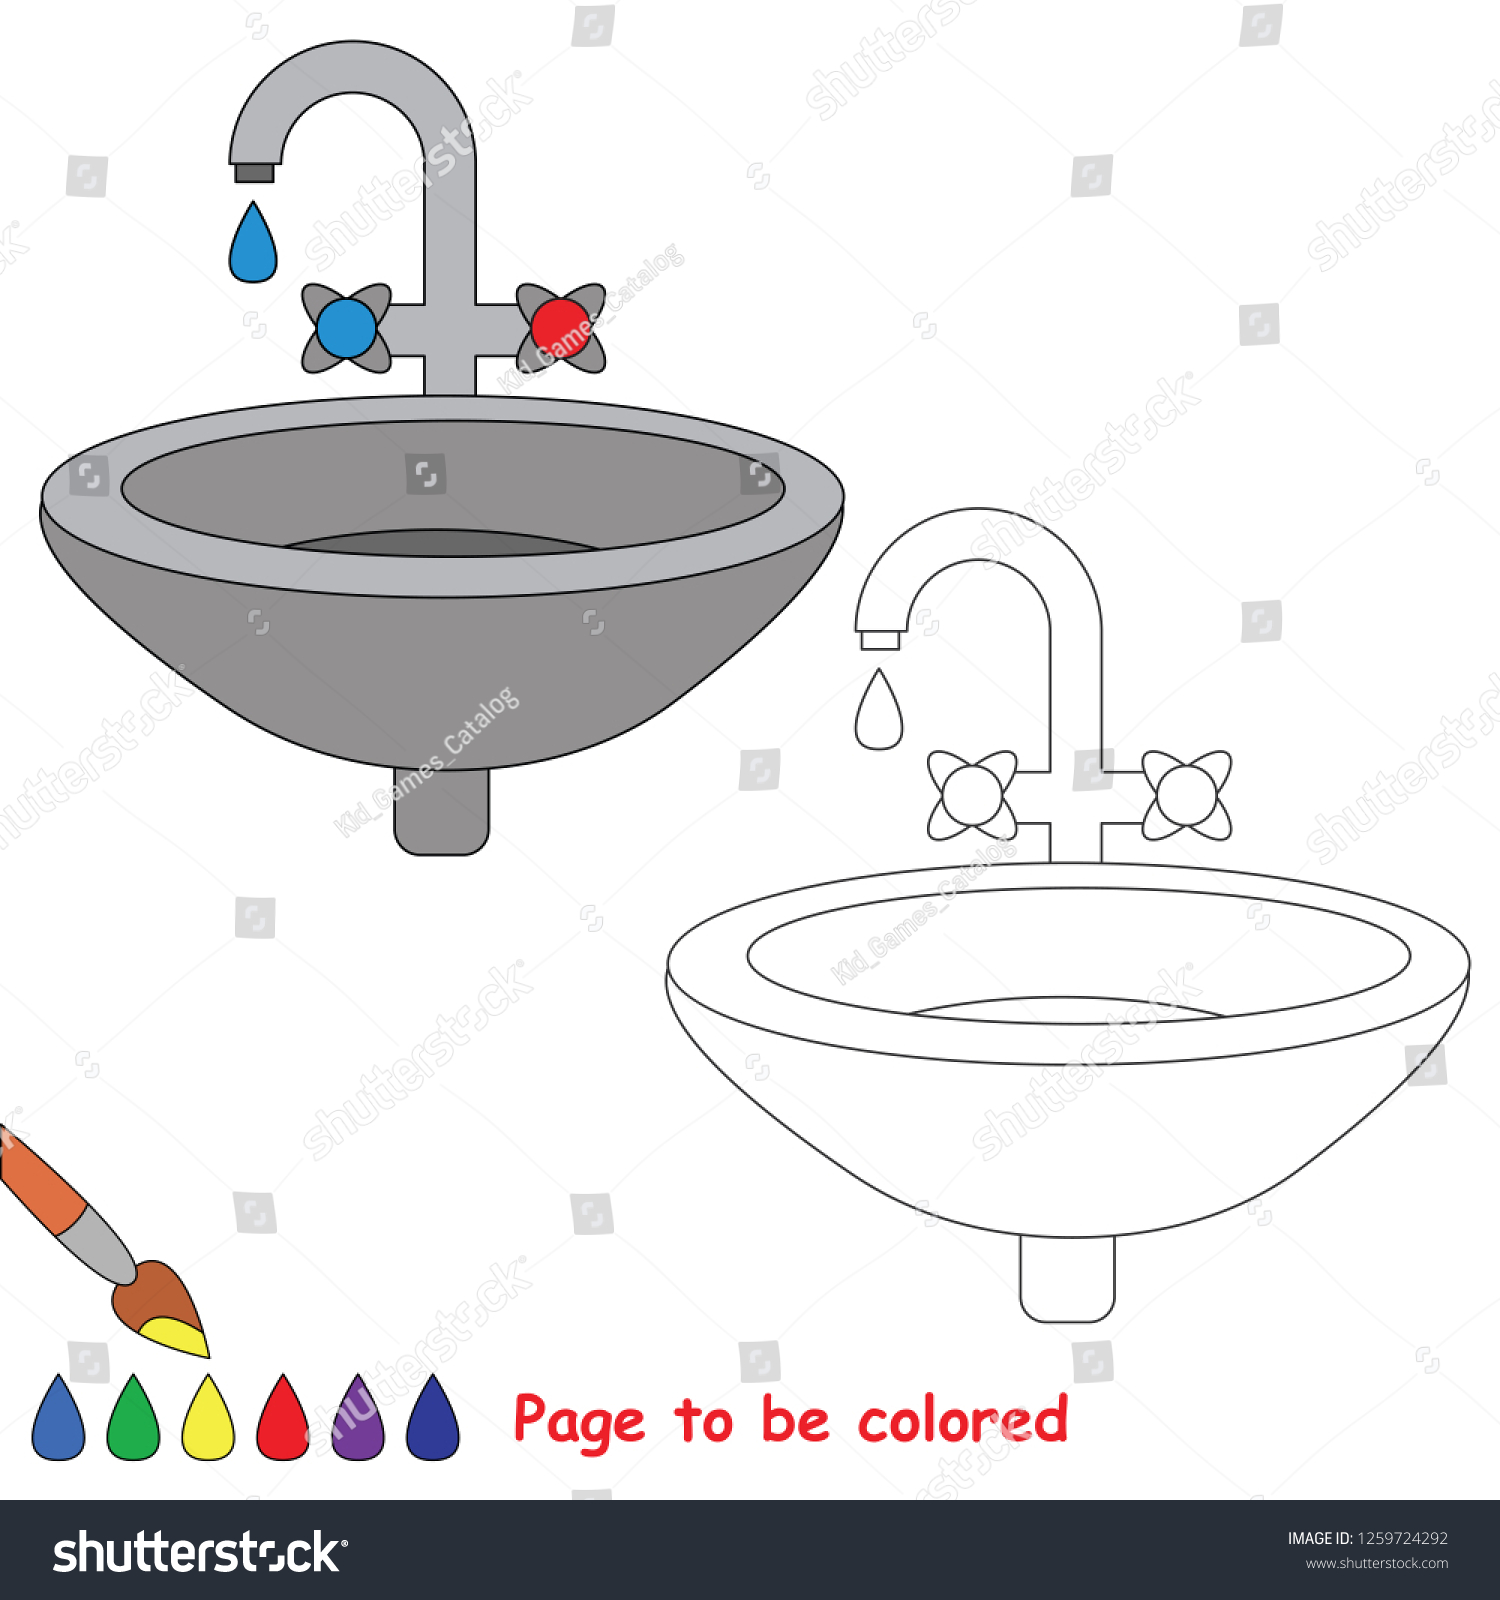 Metal sink be colored coloring book stock vector royalty free